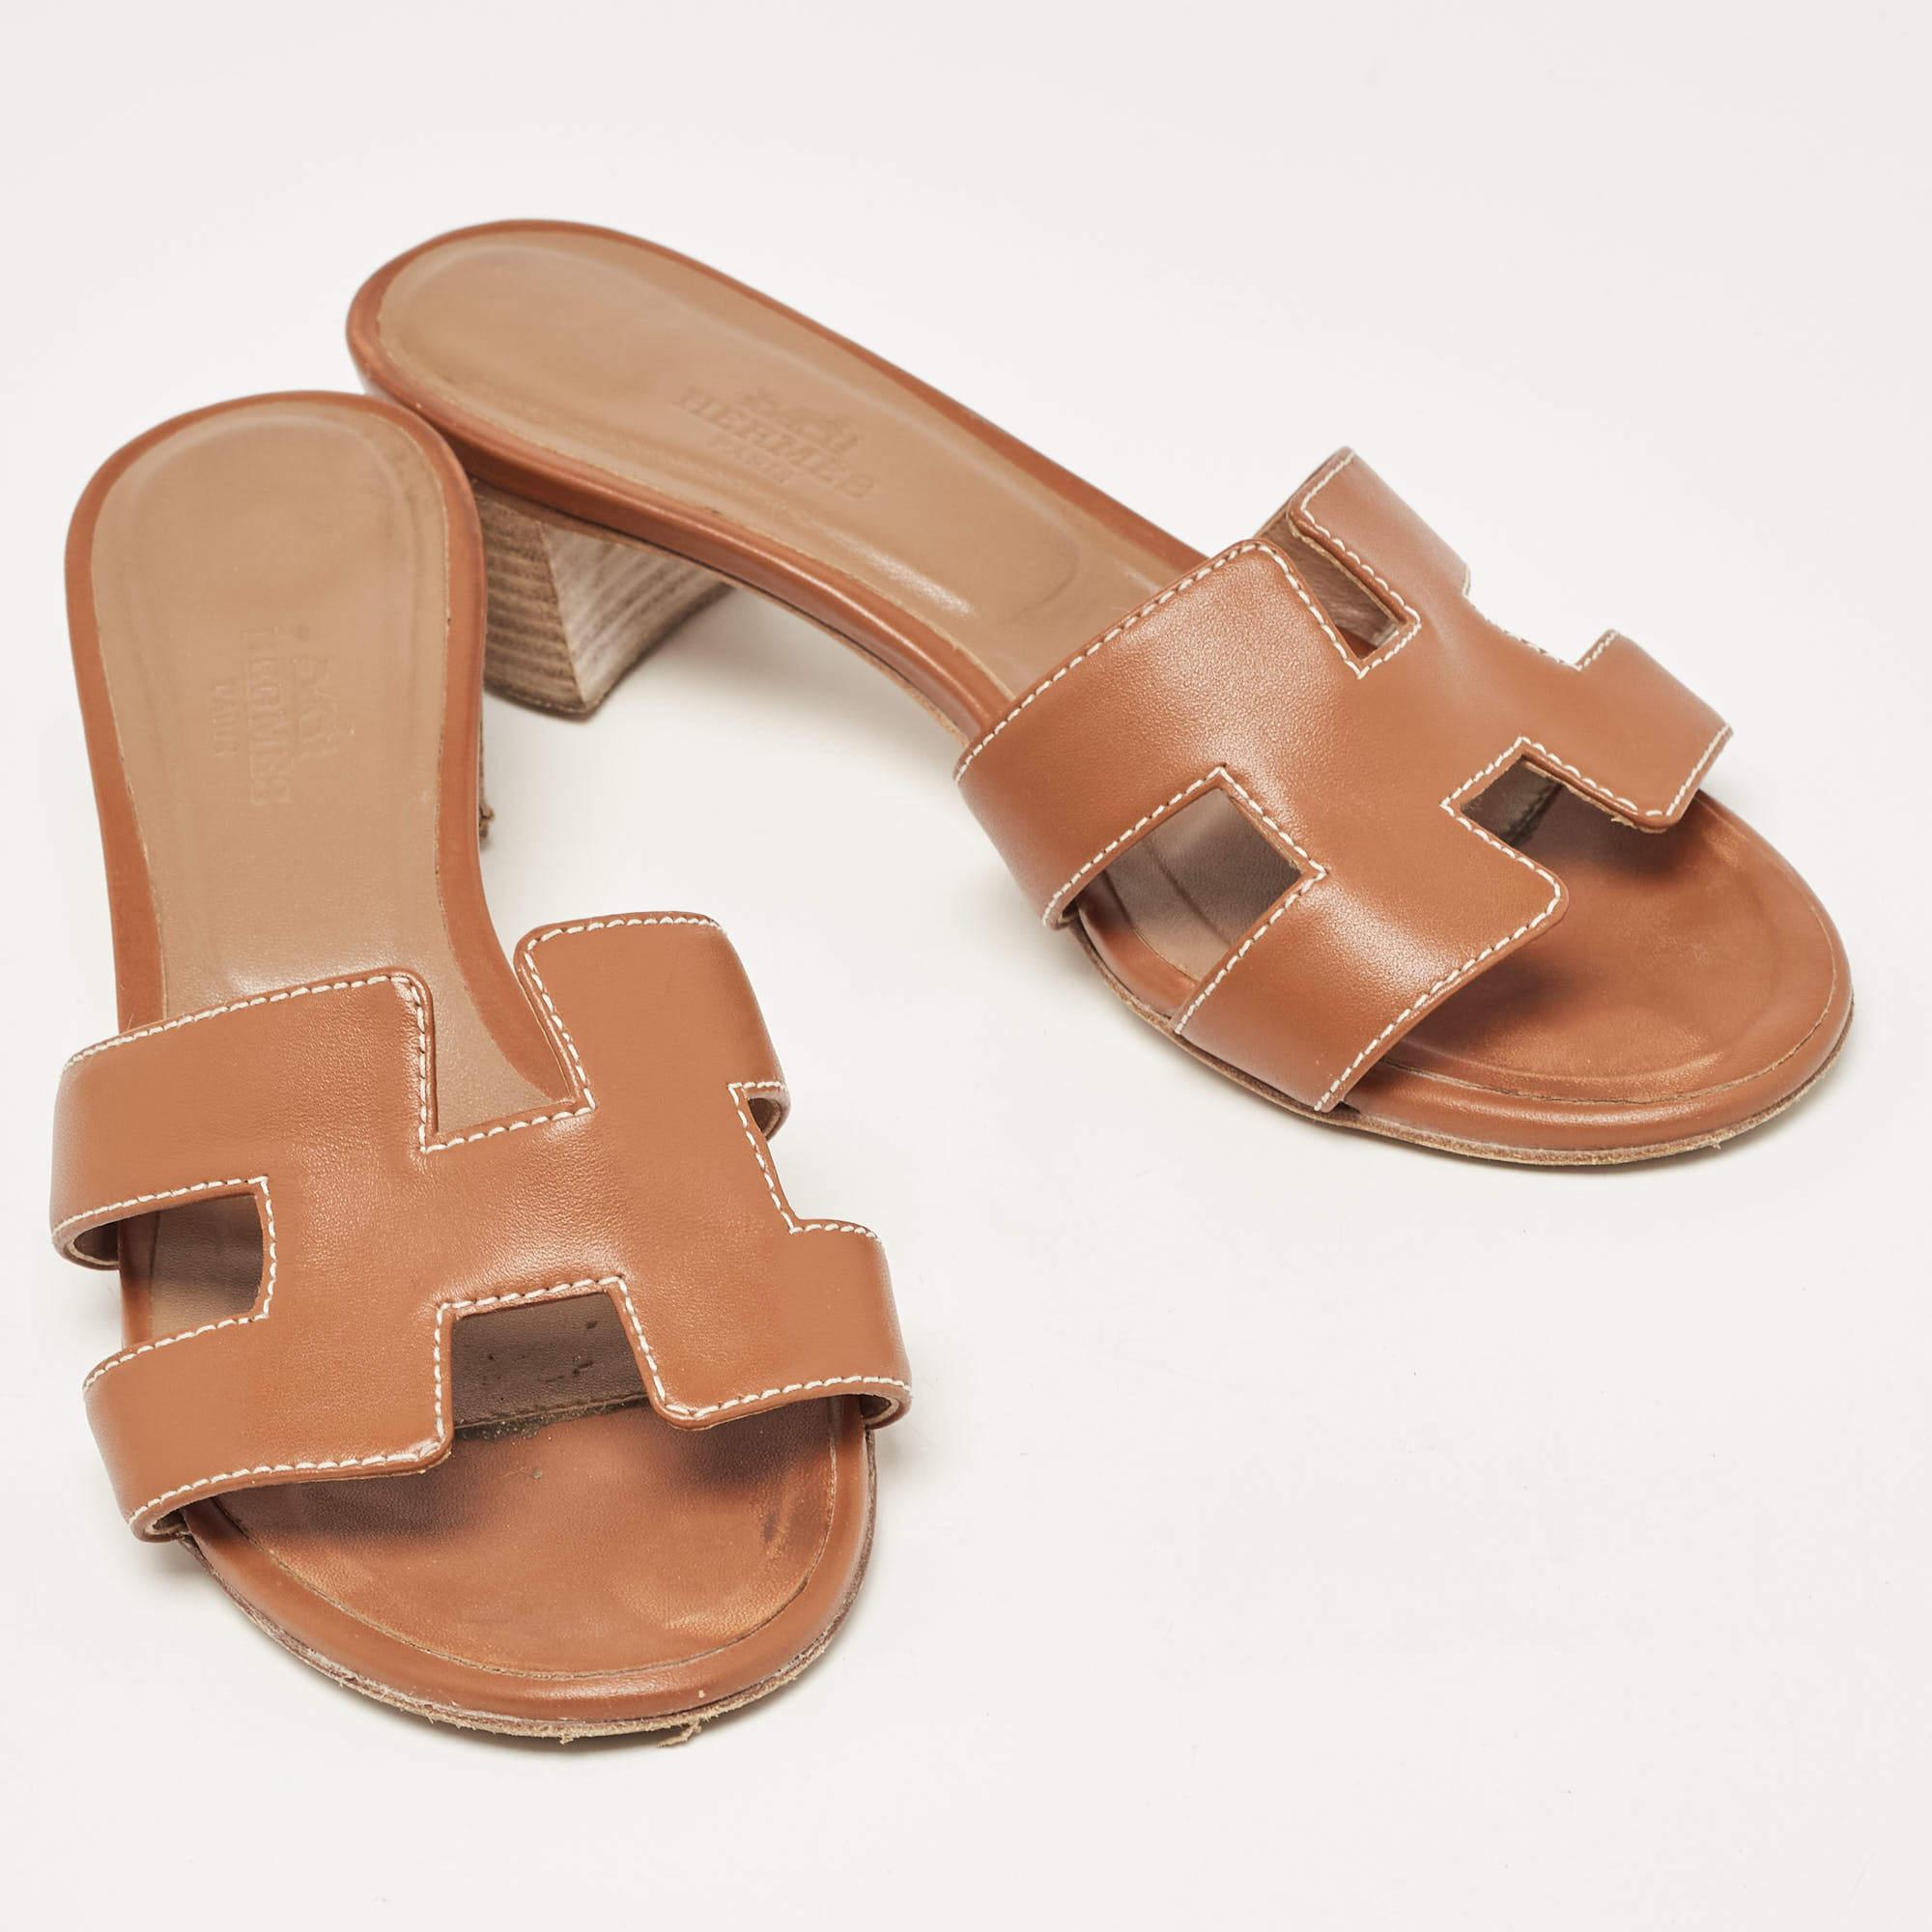 Create effortless styles with these Hermes Oasis slides. Made of quality materials, they are designed to elevate your OOTD and keep you in comfort all day long.

